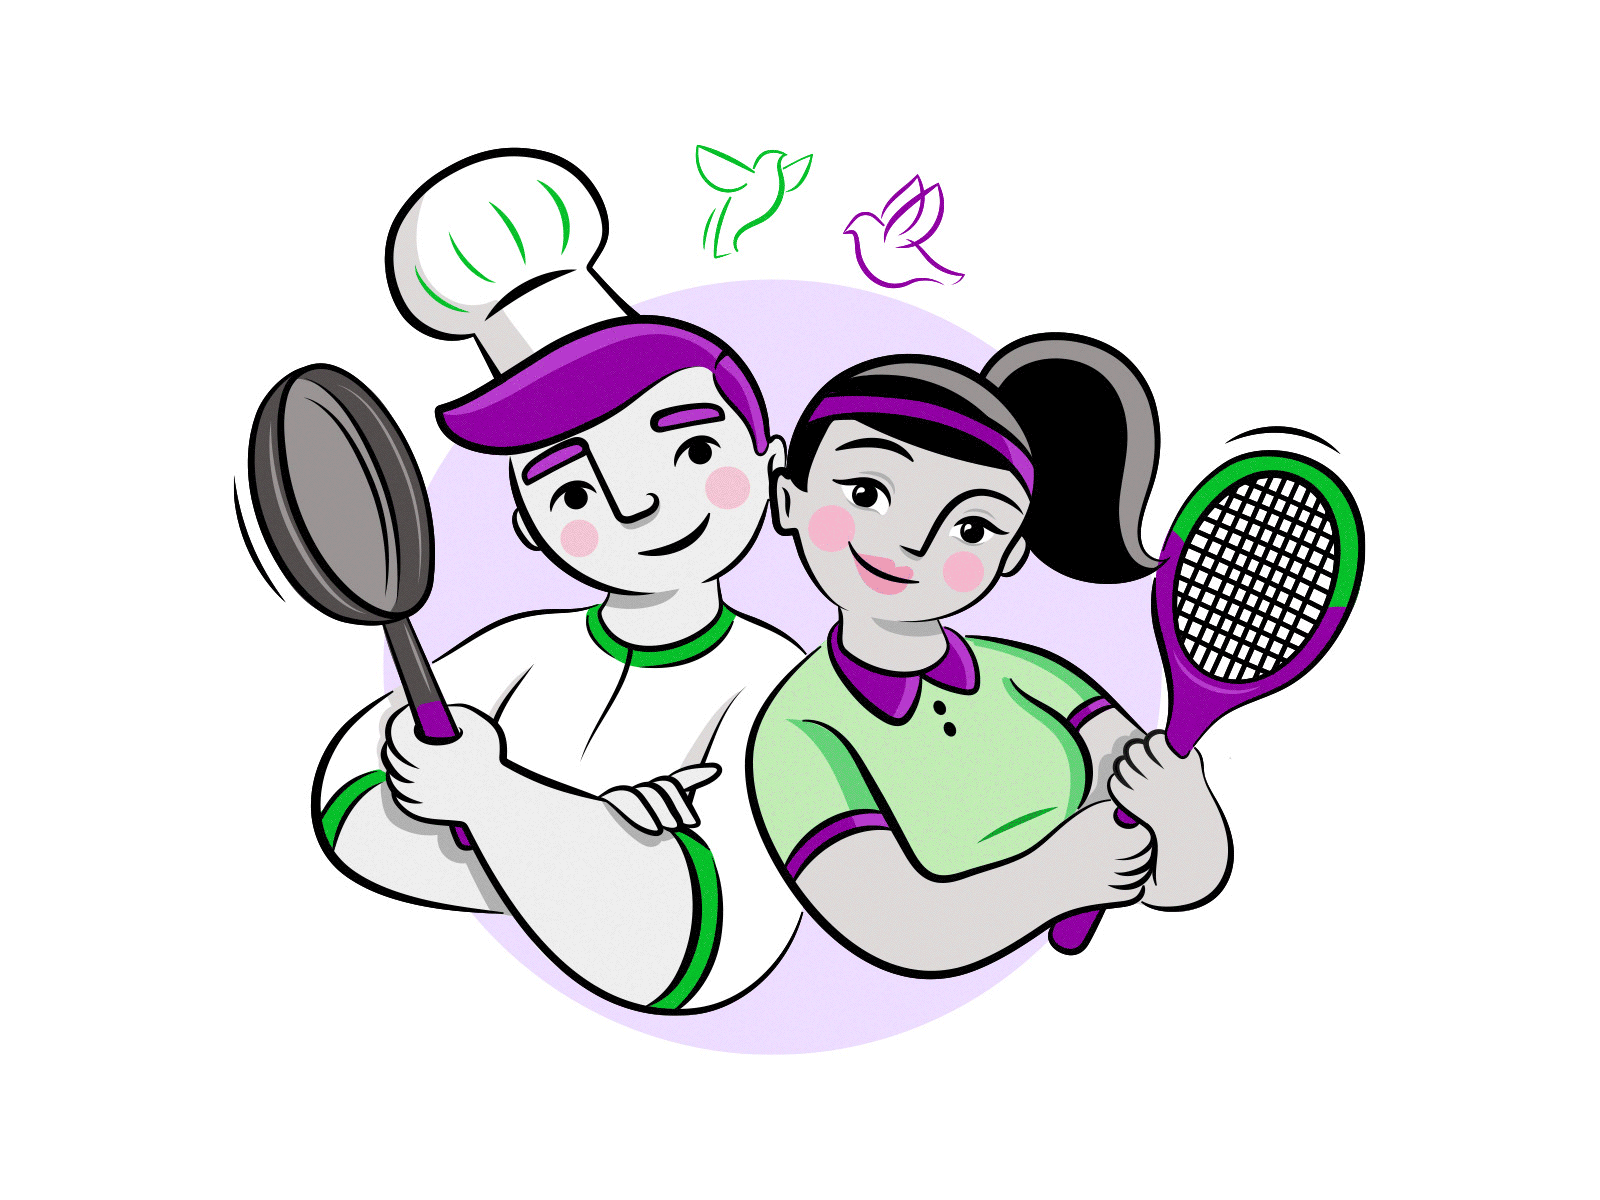 Millora characters: sport and healthy cooking